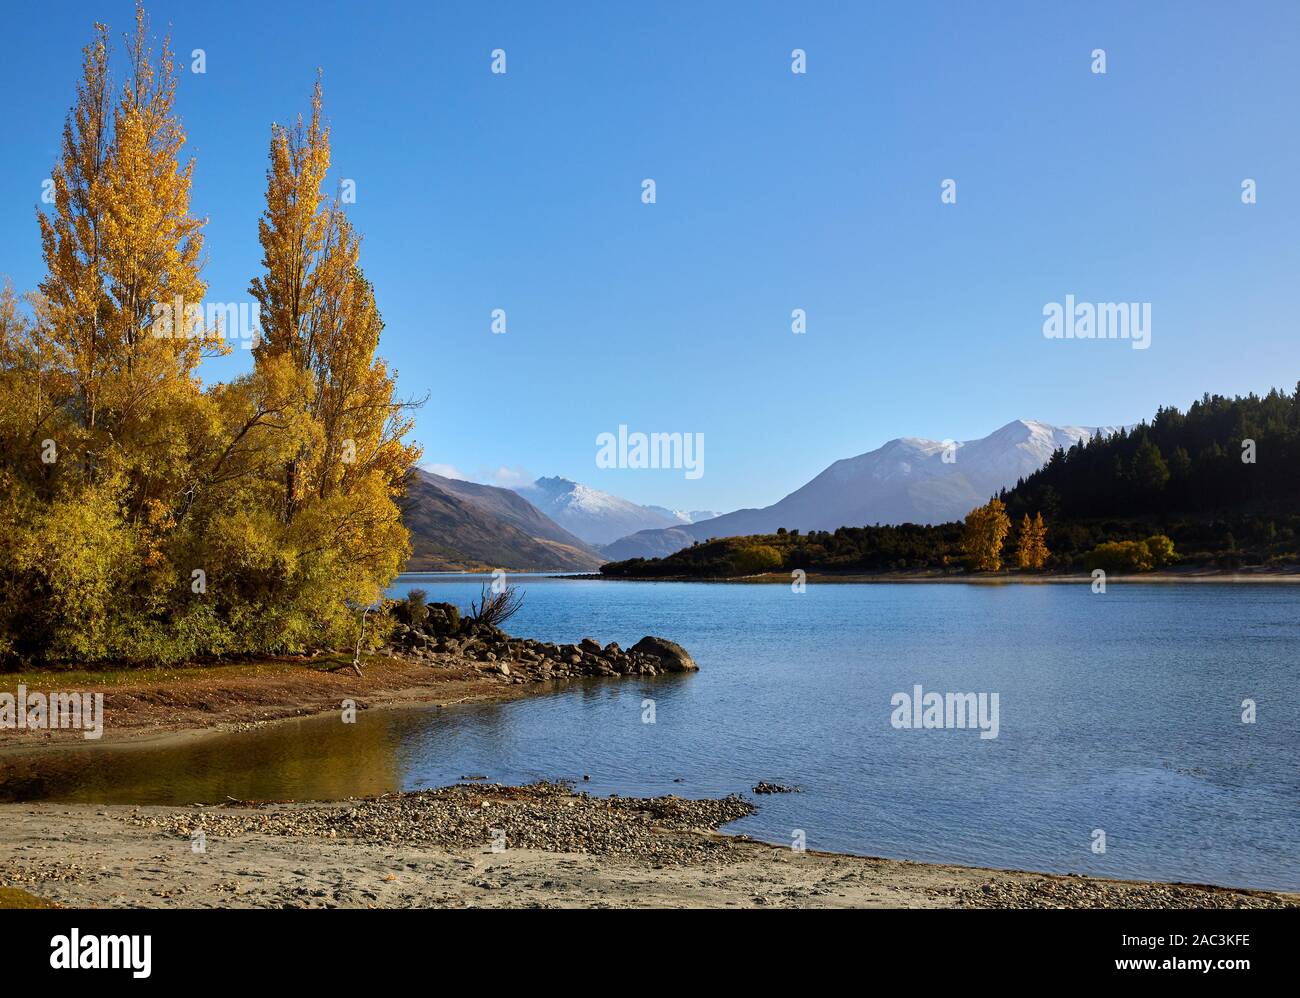 Morgen Blick auf Lake Wanaka Outlet im Herbst in South Island, Neuseeland Stockfoto